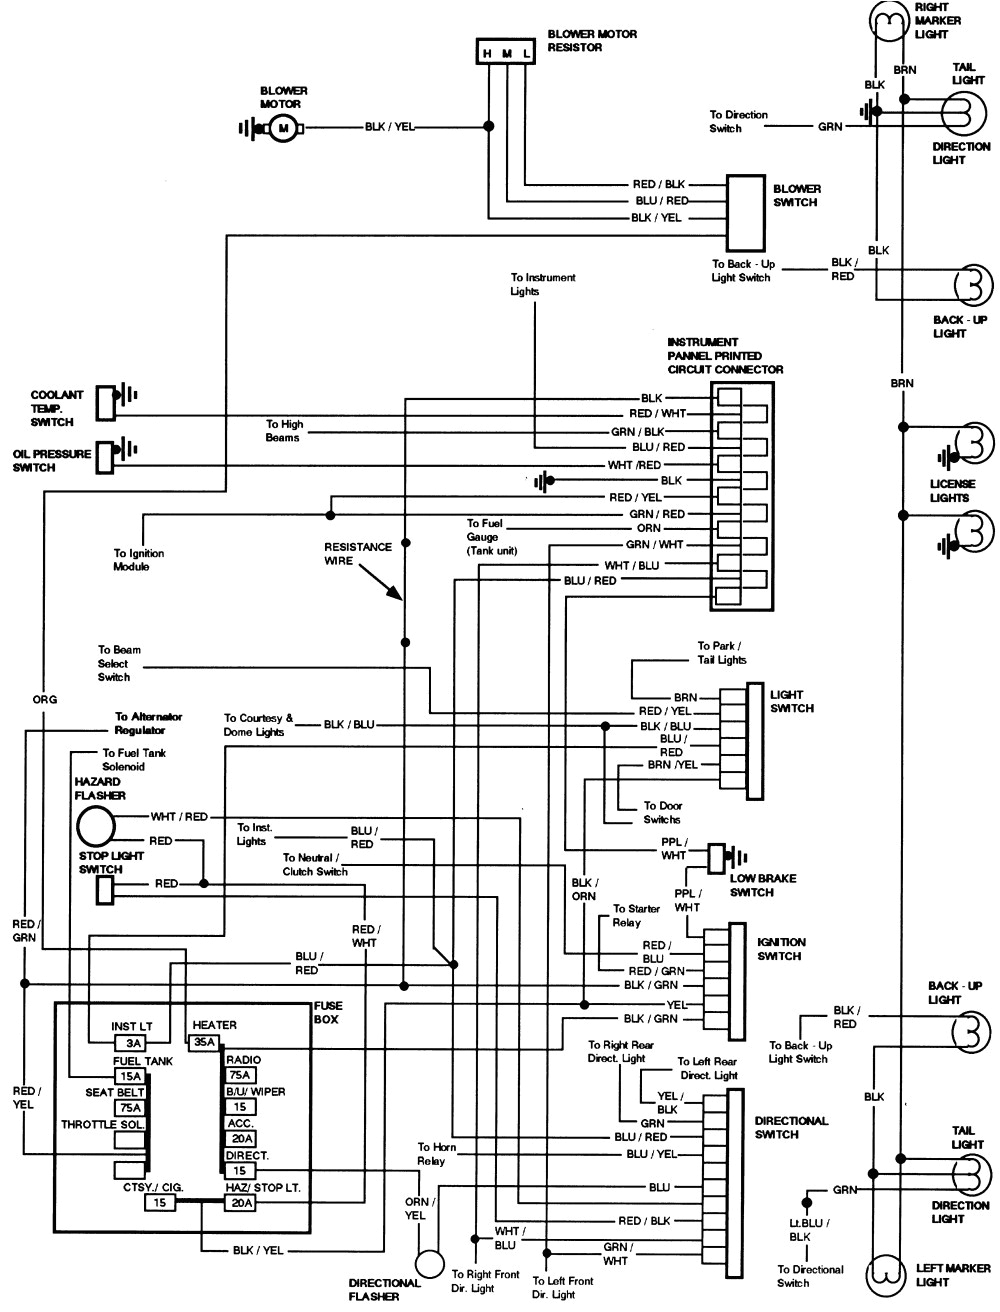 wiring diagram for ford mustang free wiring diagram post wiring diagram for a 1970 ford mustang